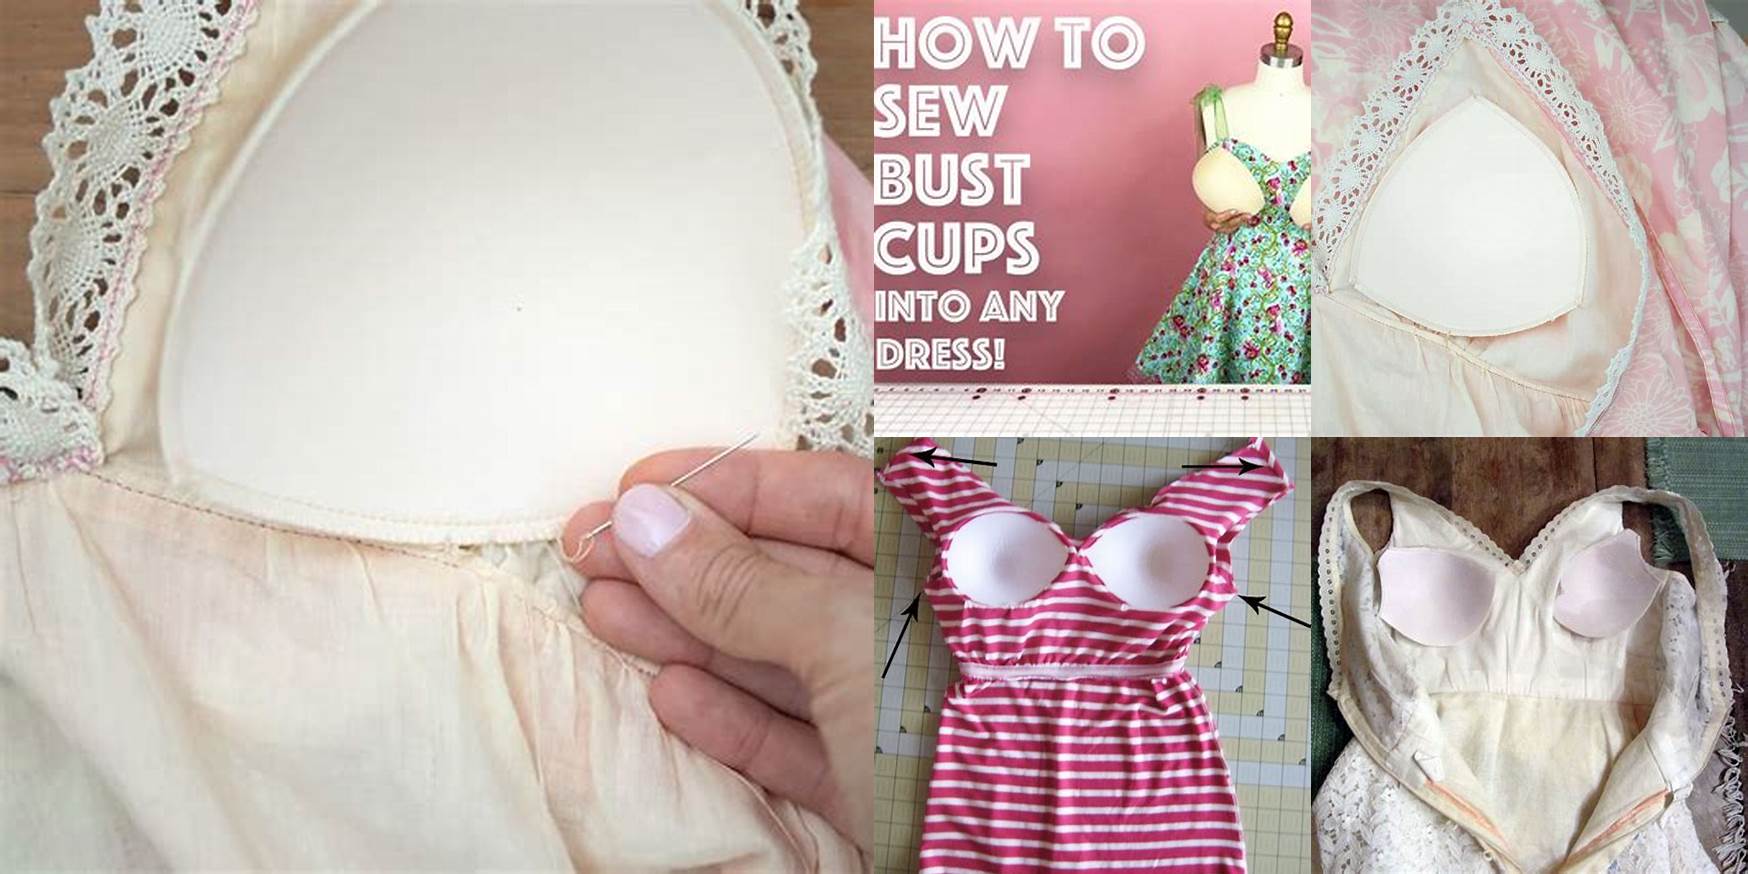 How To Sew Bra Cups Into A Dress